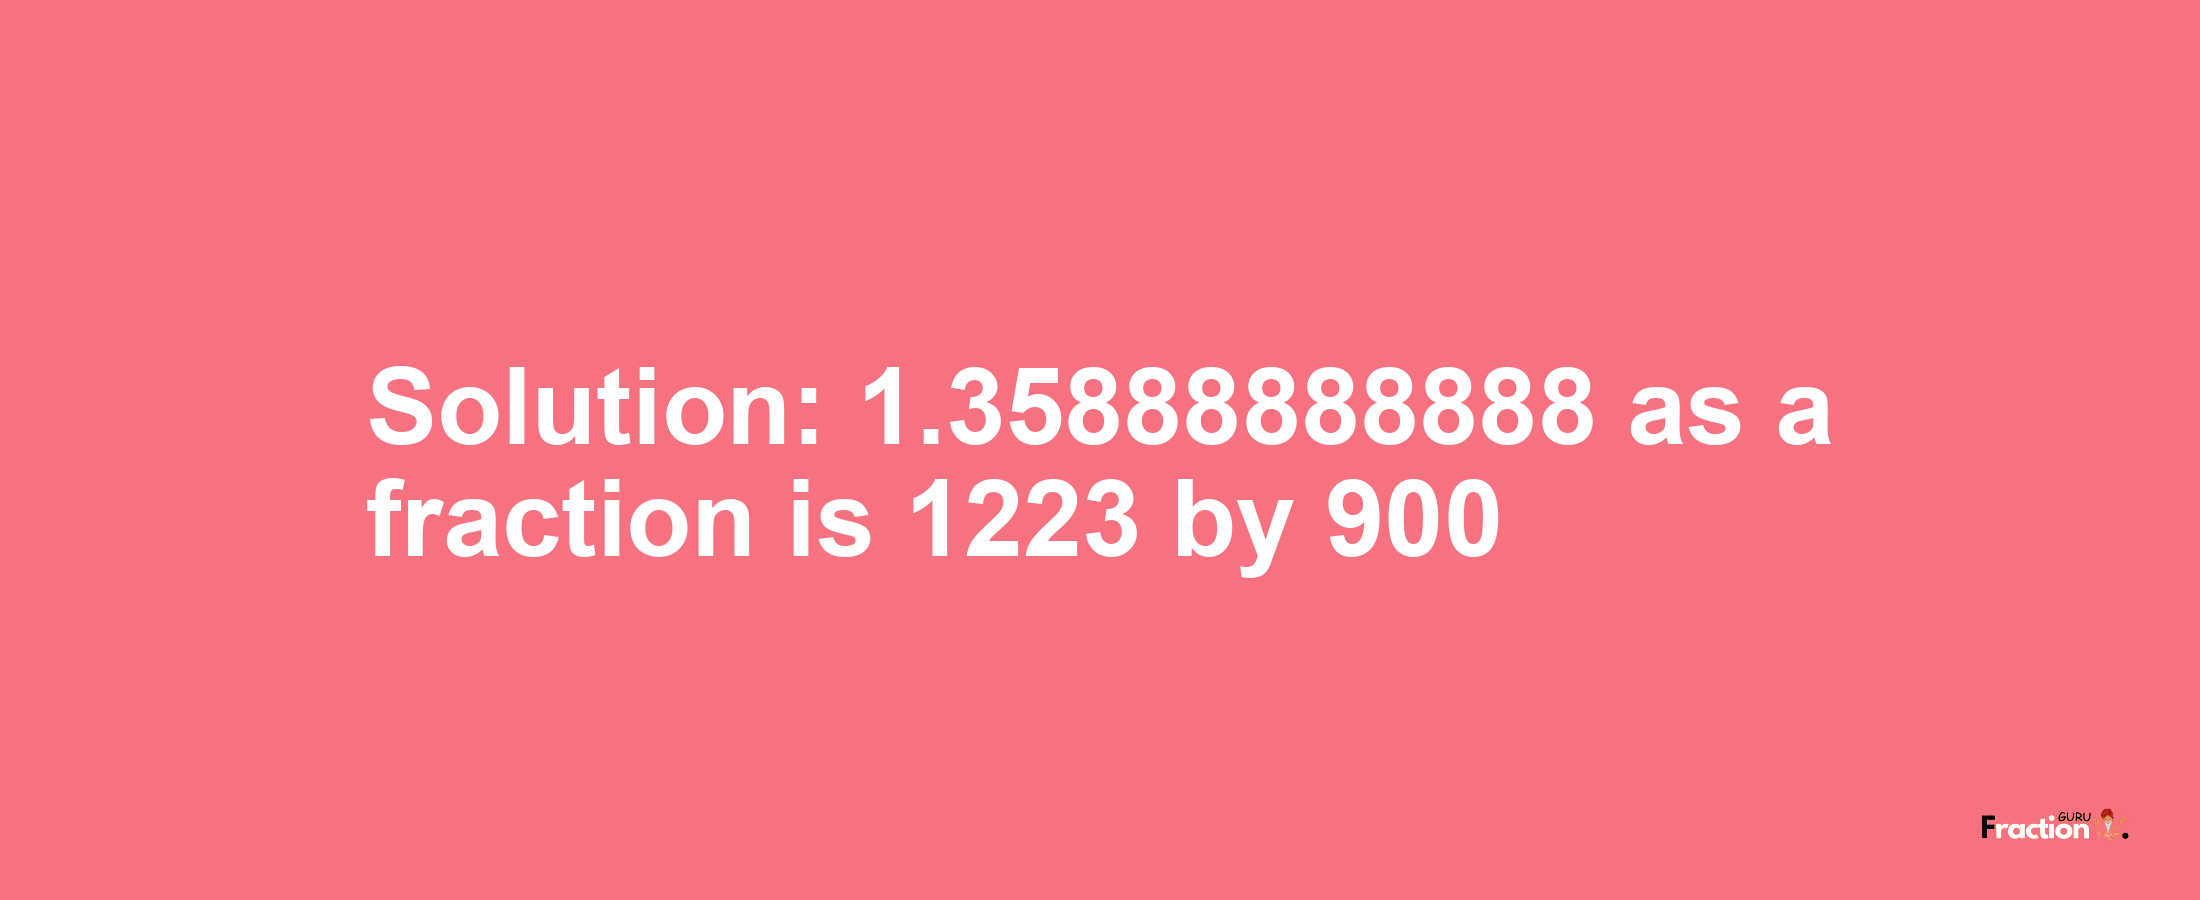 Solution:1.35888888888 as a fraction is 1223/900